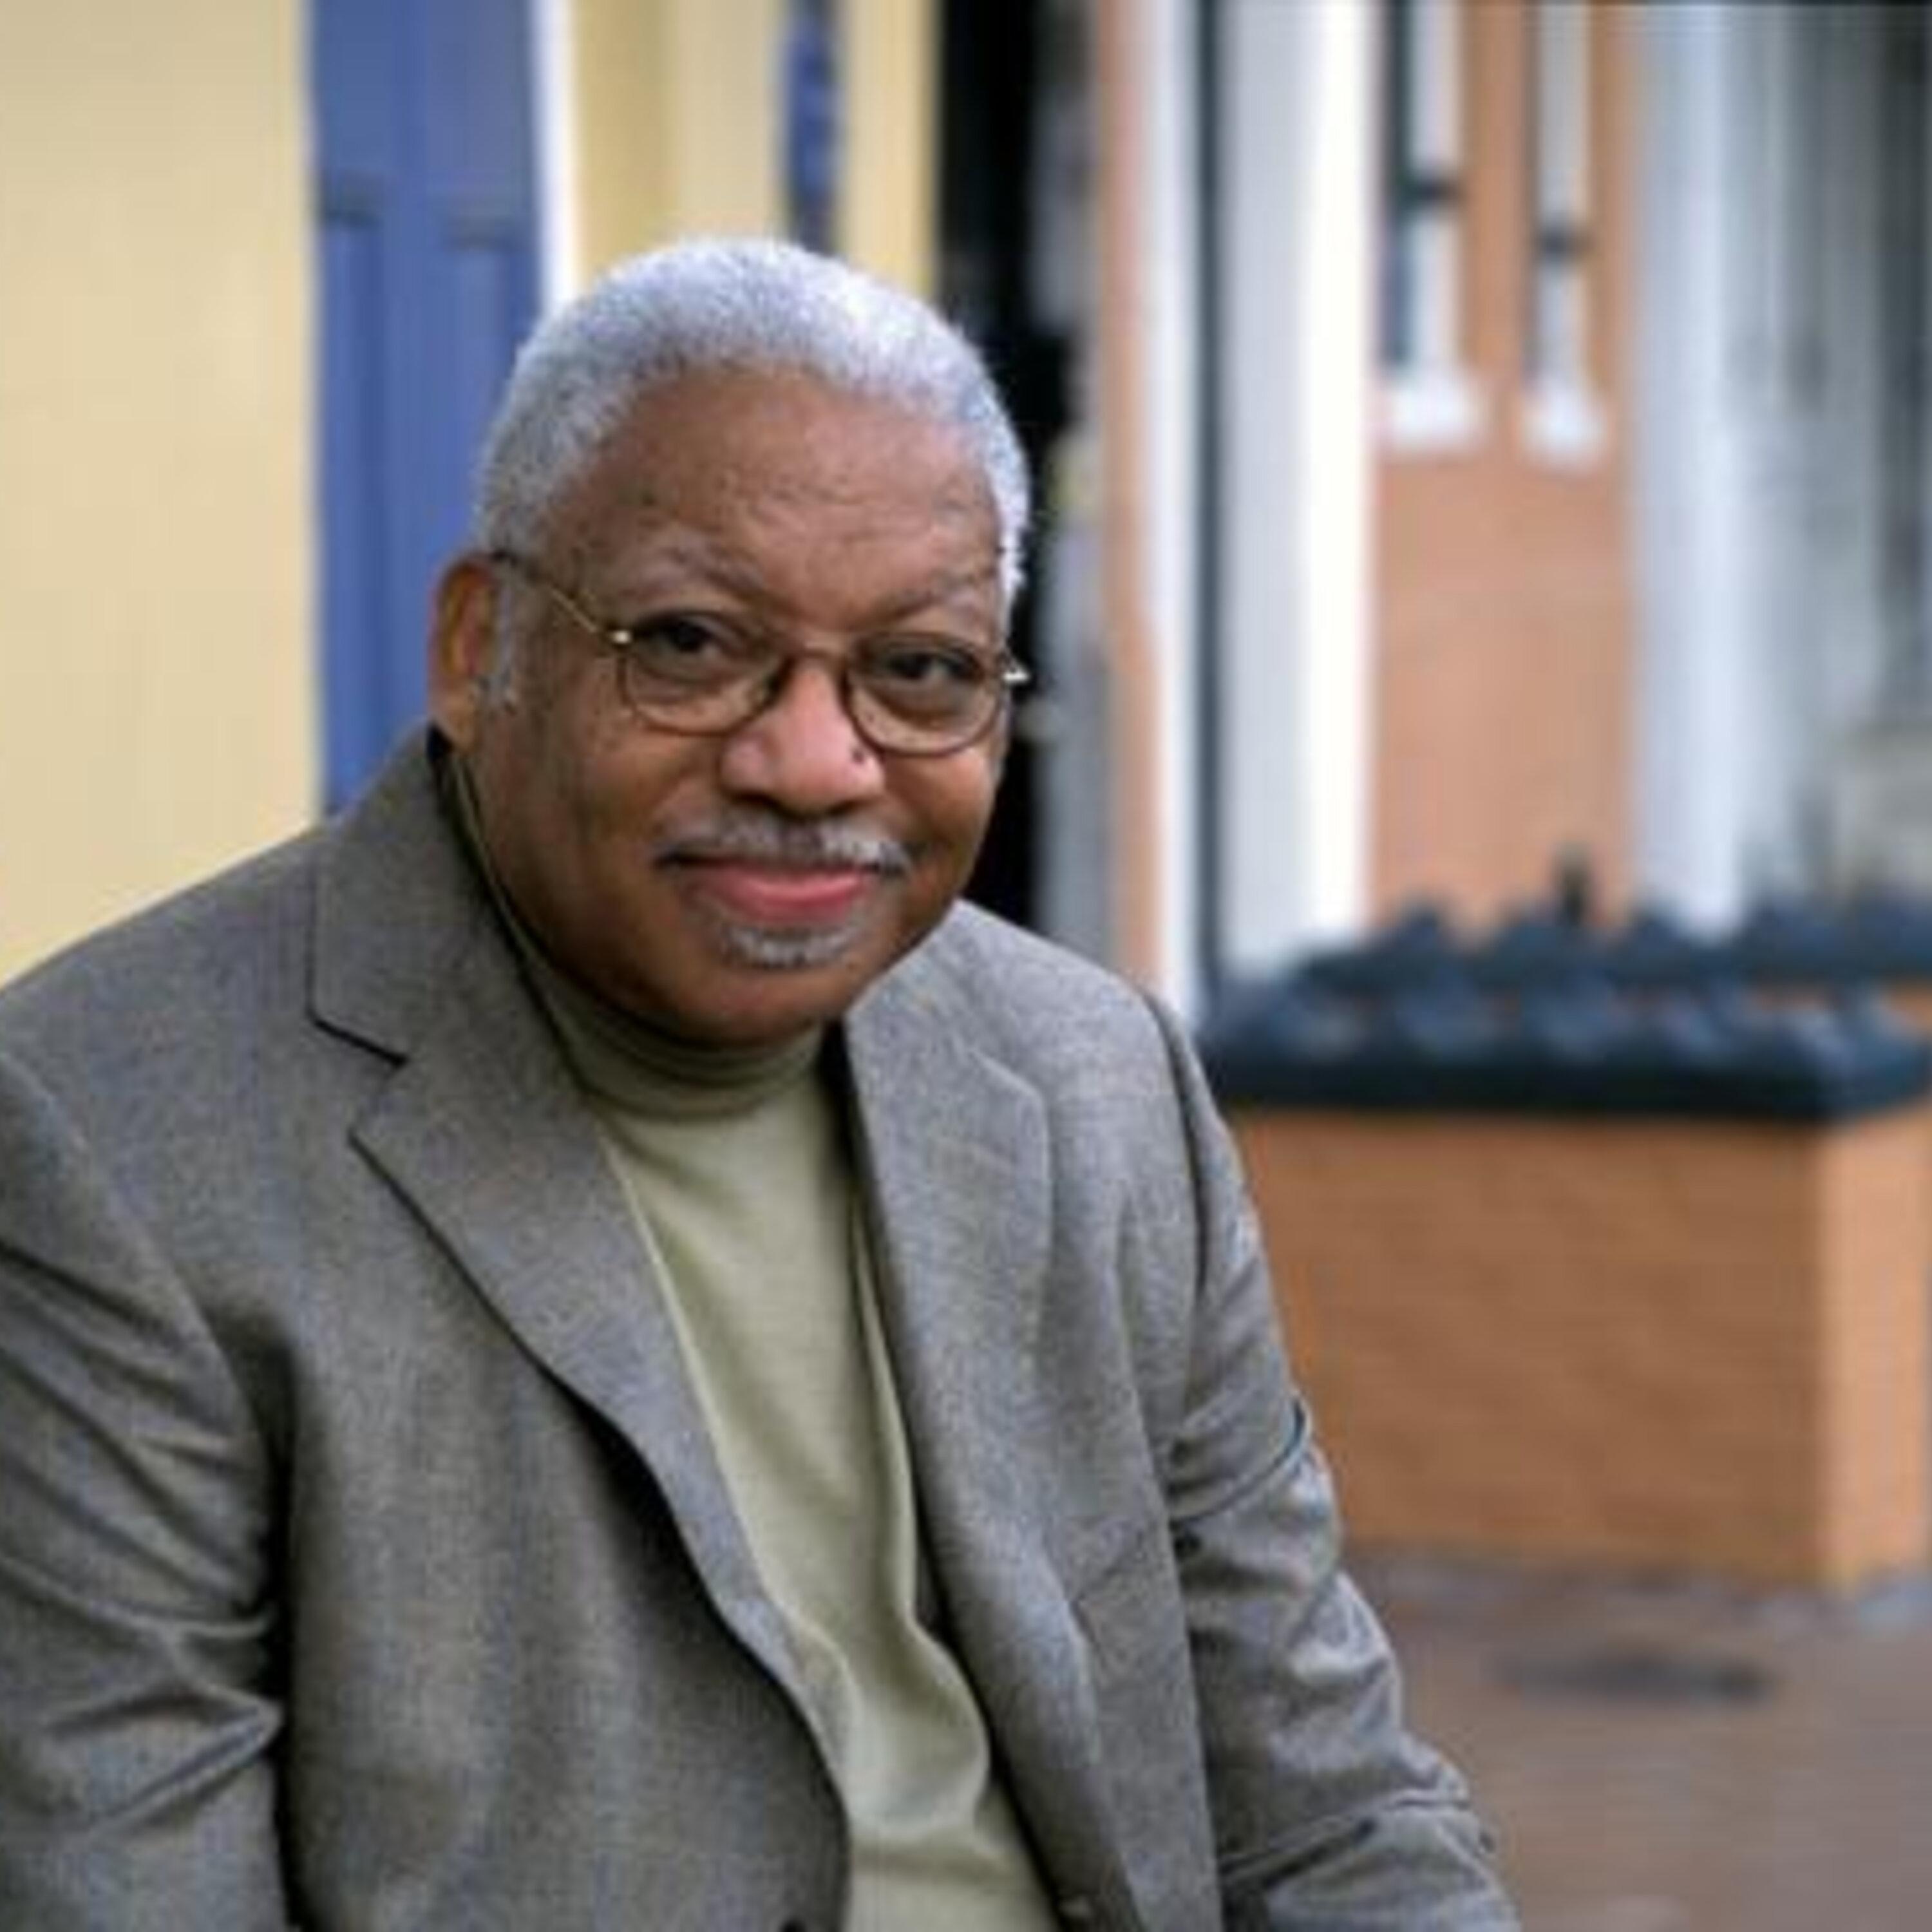 Thumbnail for "Louisiana Considered: Ellis Marsalis' Legacy, A Brighter Future for NOLA's Big Industries".